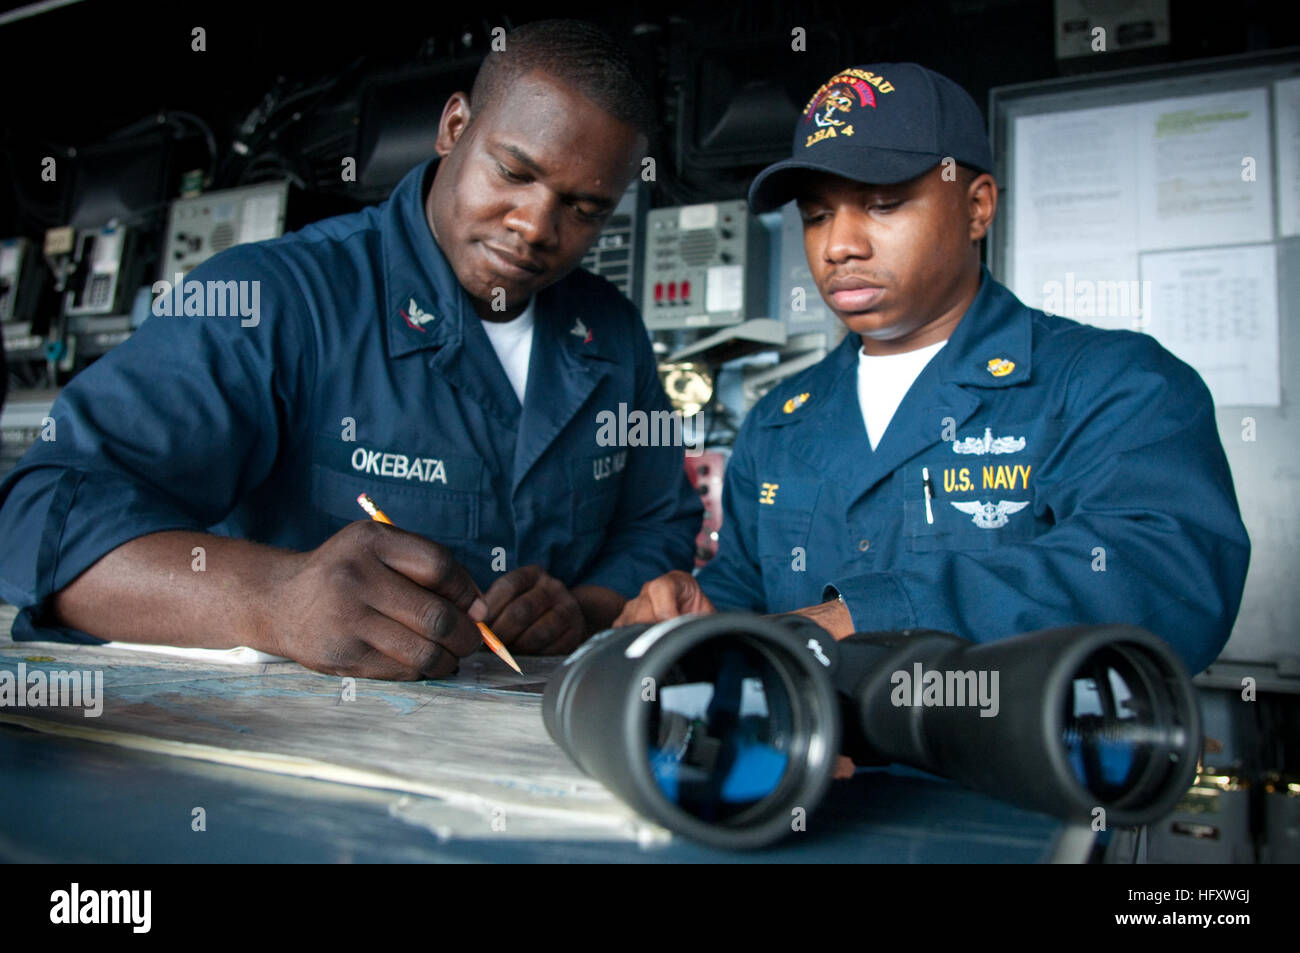 091024-N-5319A-002 ATLANTIC (October 24, 2009) Quartermaster 3rd Class Oscar Okebata, left, from Philadelphia, and acting junior Officer of the Deck Chief Operations specialist Duran Lee, from West Point, Miss., read the chart table aboard the amphibious assault ship USS Nassau (LHA 4) to determine where the ship will be at a given time for the officer of the deck. Nassau is conducting a Composite Unit Training Exercise (COMPTUEX). COMPTUEX is designed to provide realistic training environments for U.S. naval forces that closely replicate the operational challenges routinely encountered during Stock Photo